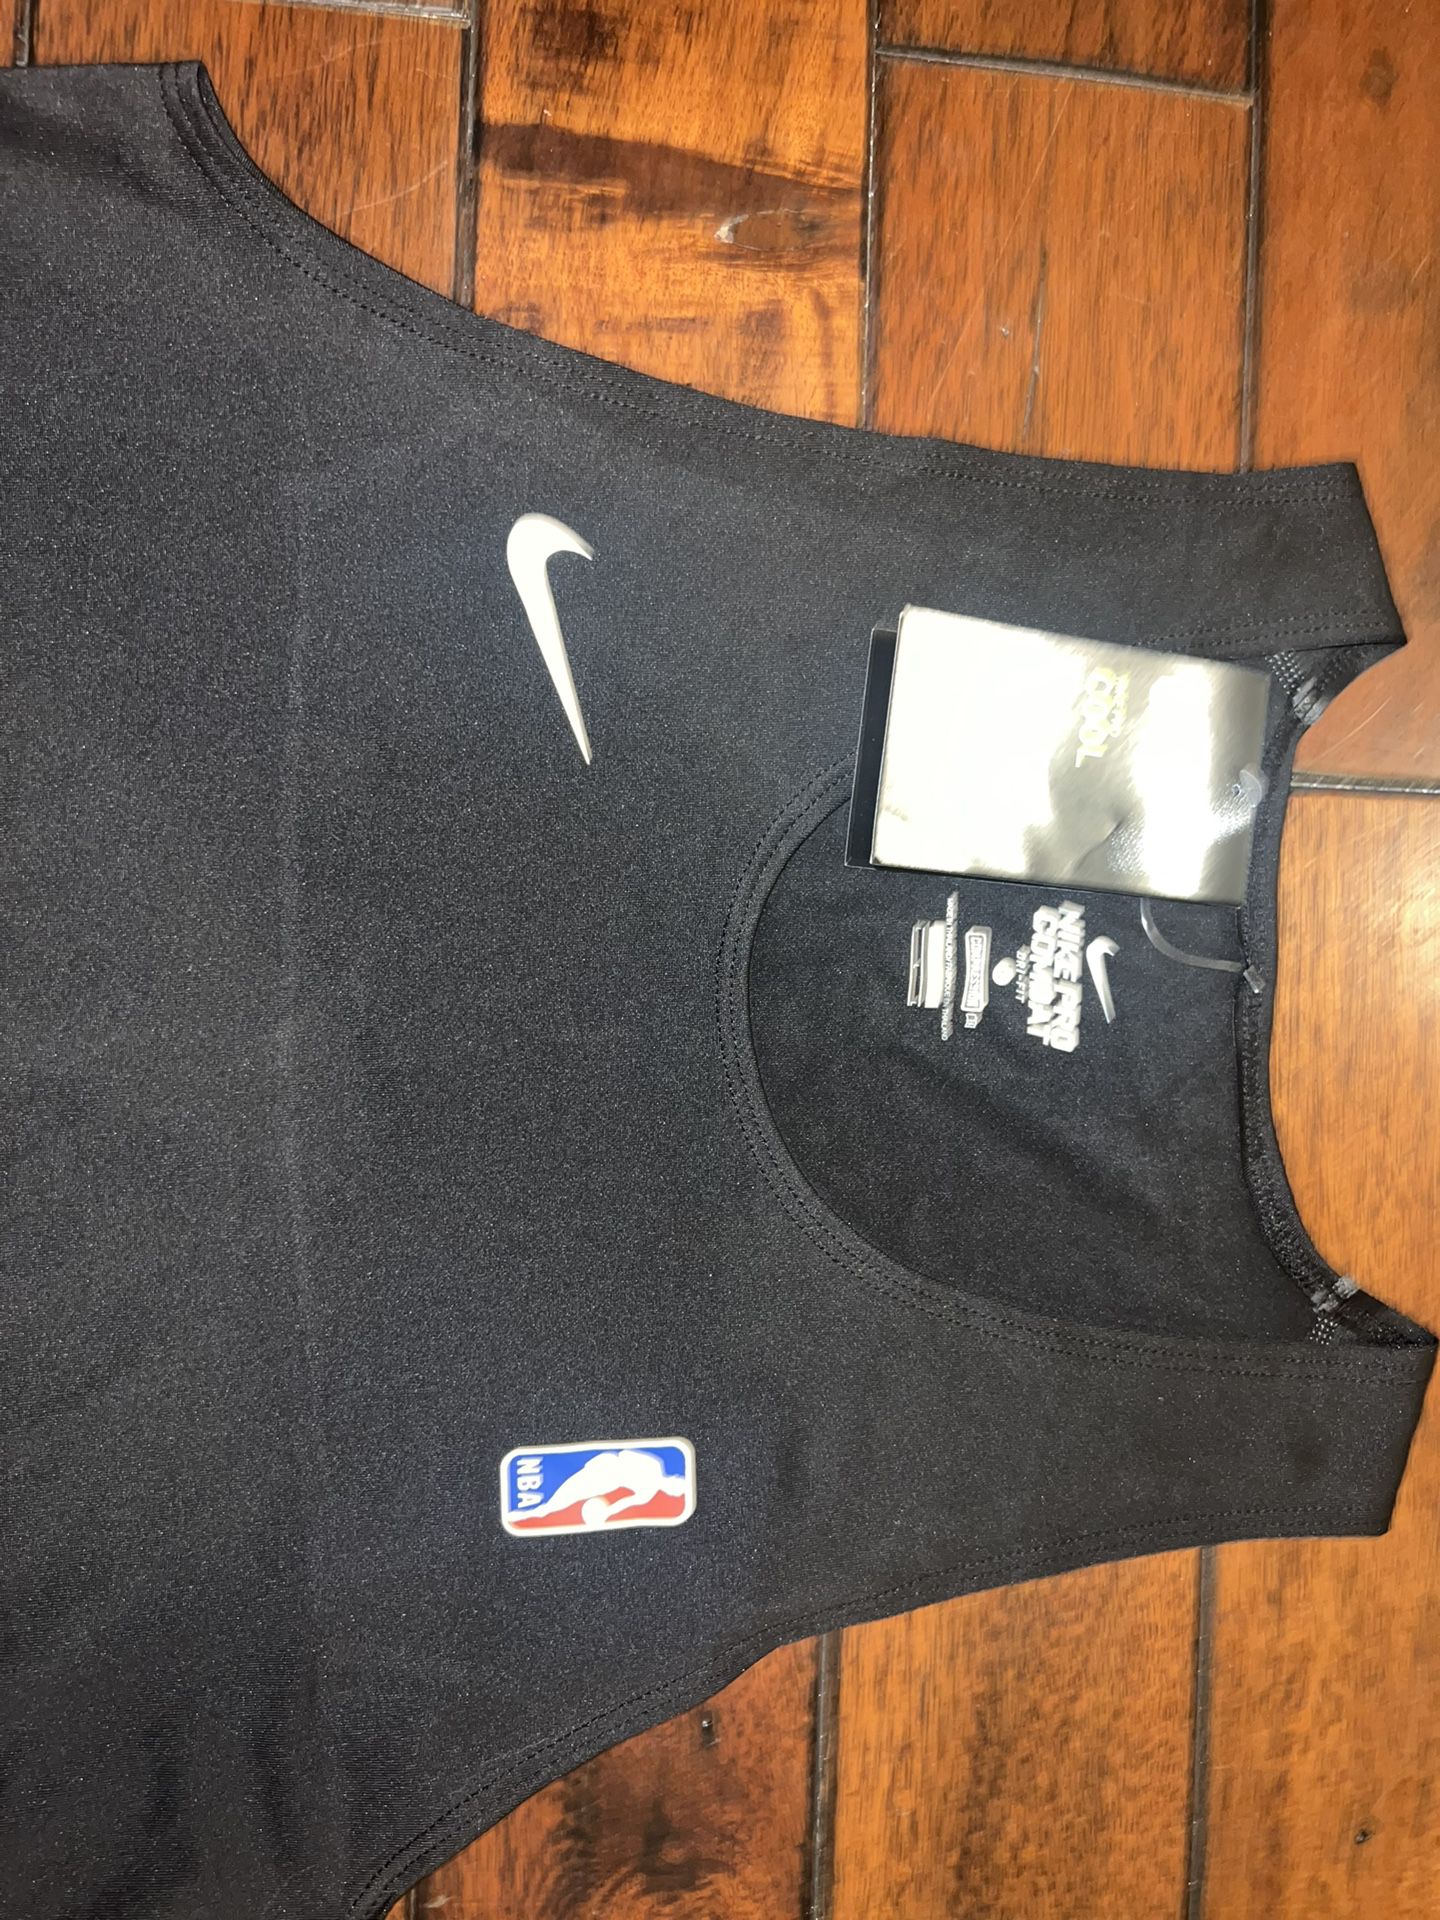 NBA Nike Compression Shirt EYBL for Sale in Knoxville, TN - OfferUp